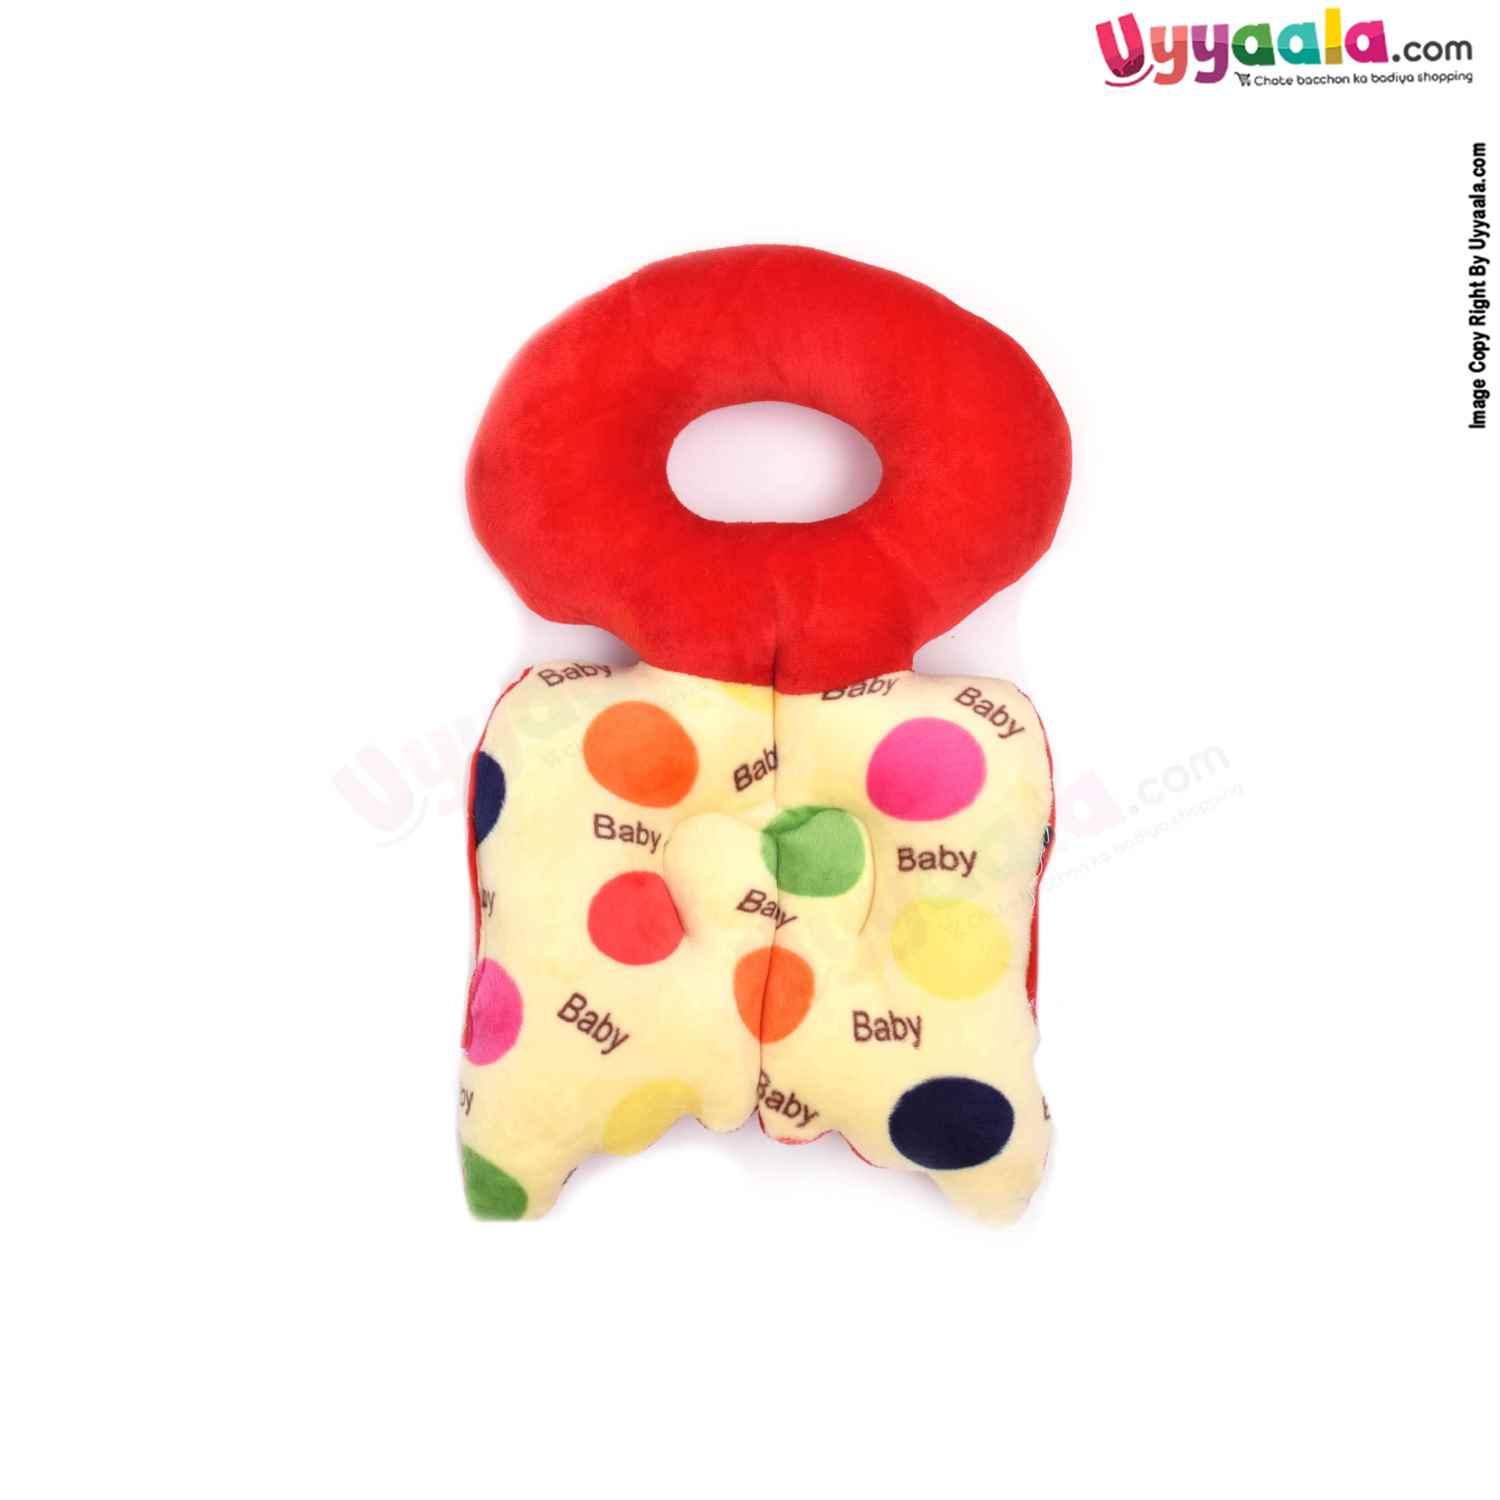 Baby Head Protector with Pillow with Adjustable Straps & Velvet Material, with Print 4-18m Age